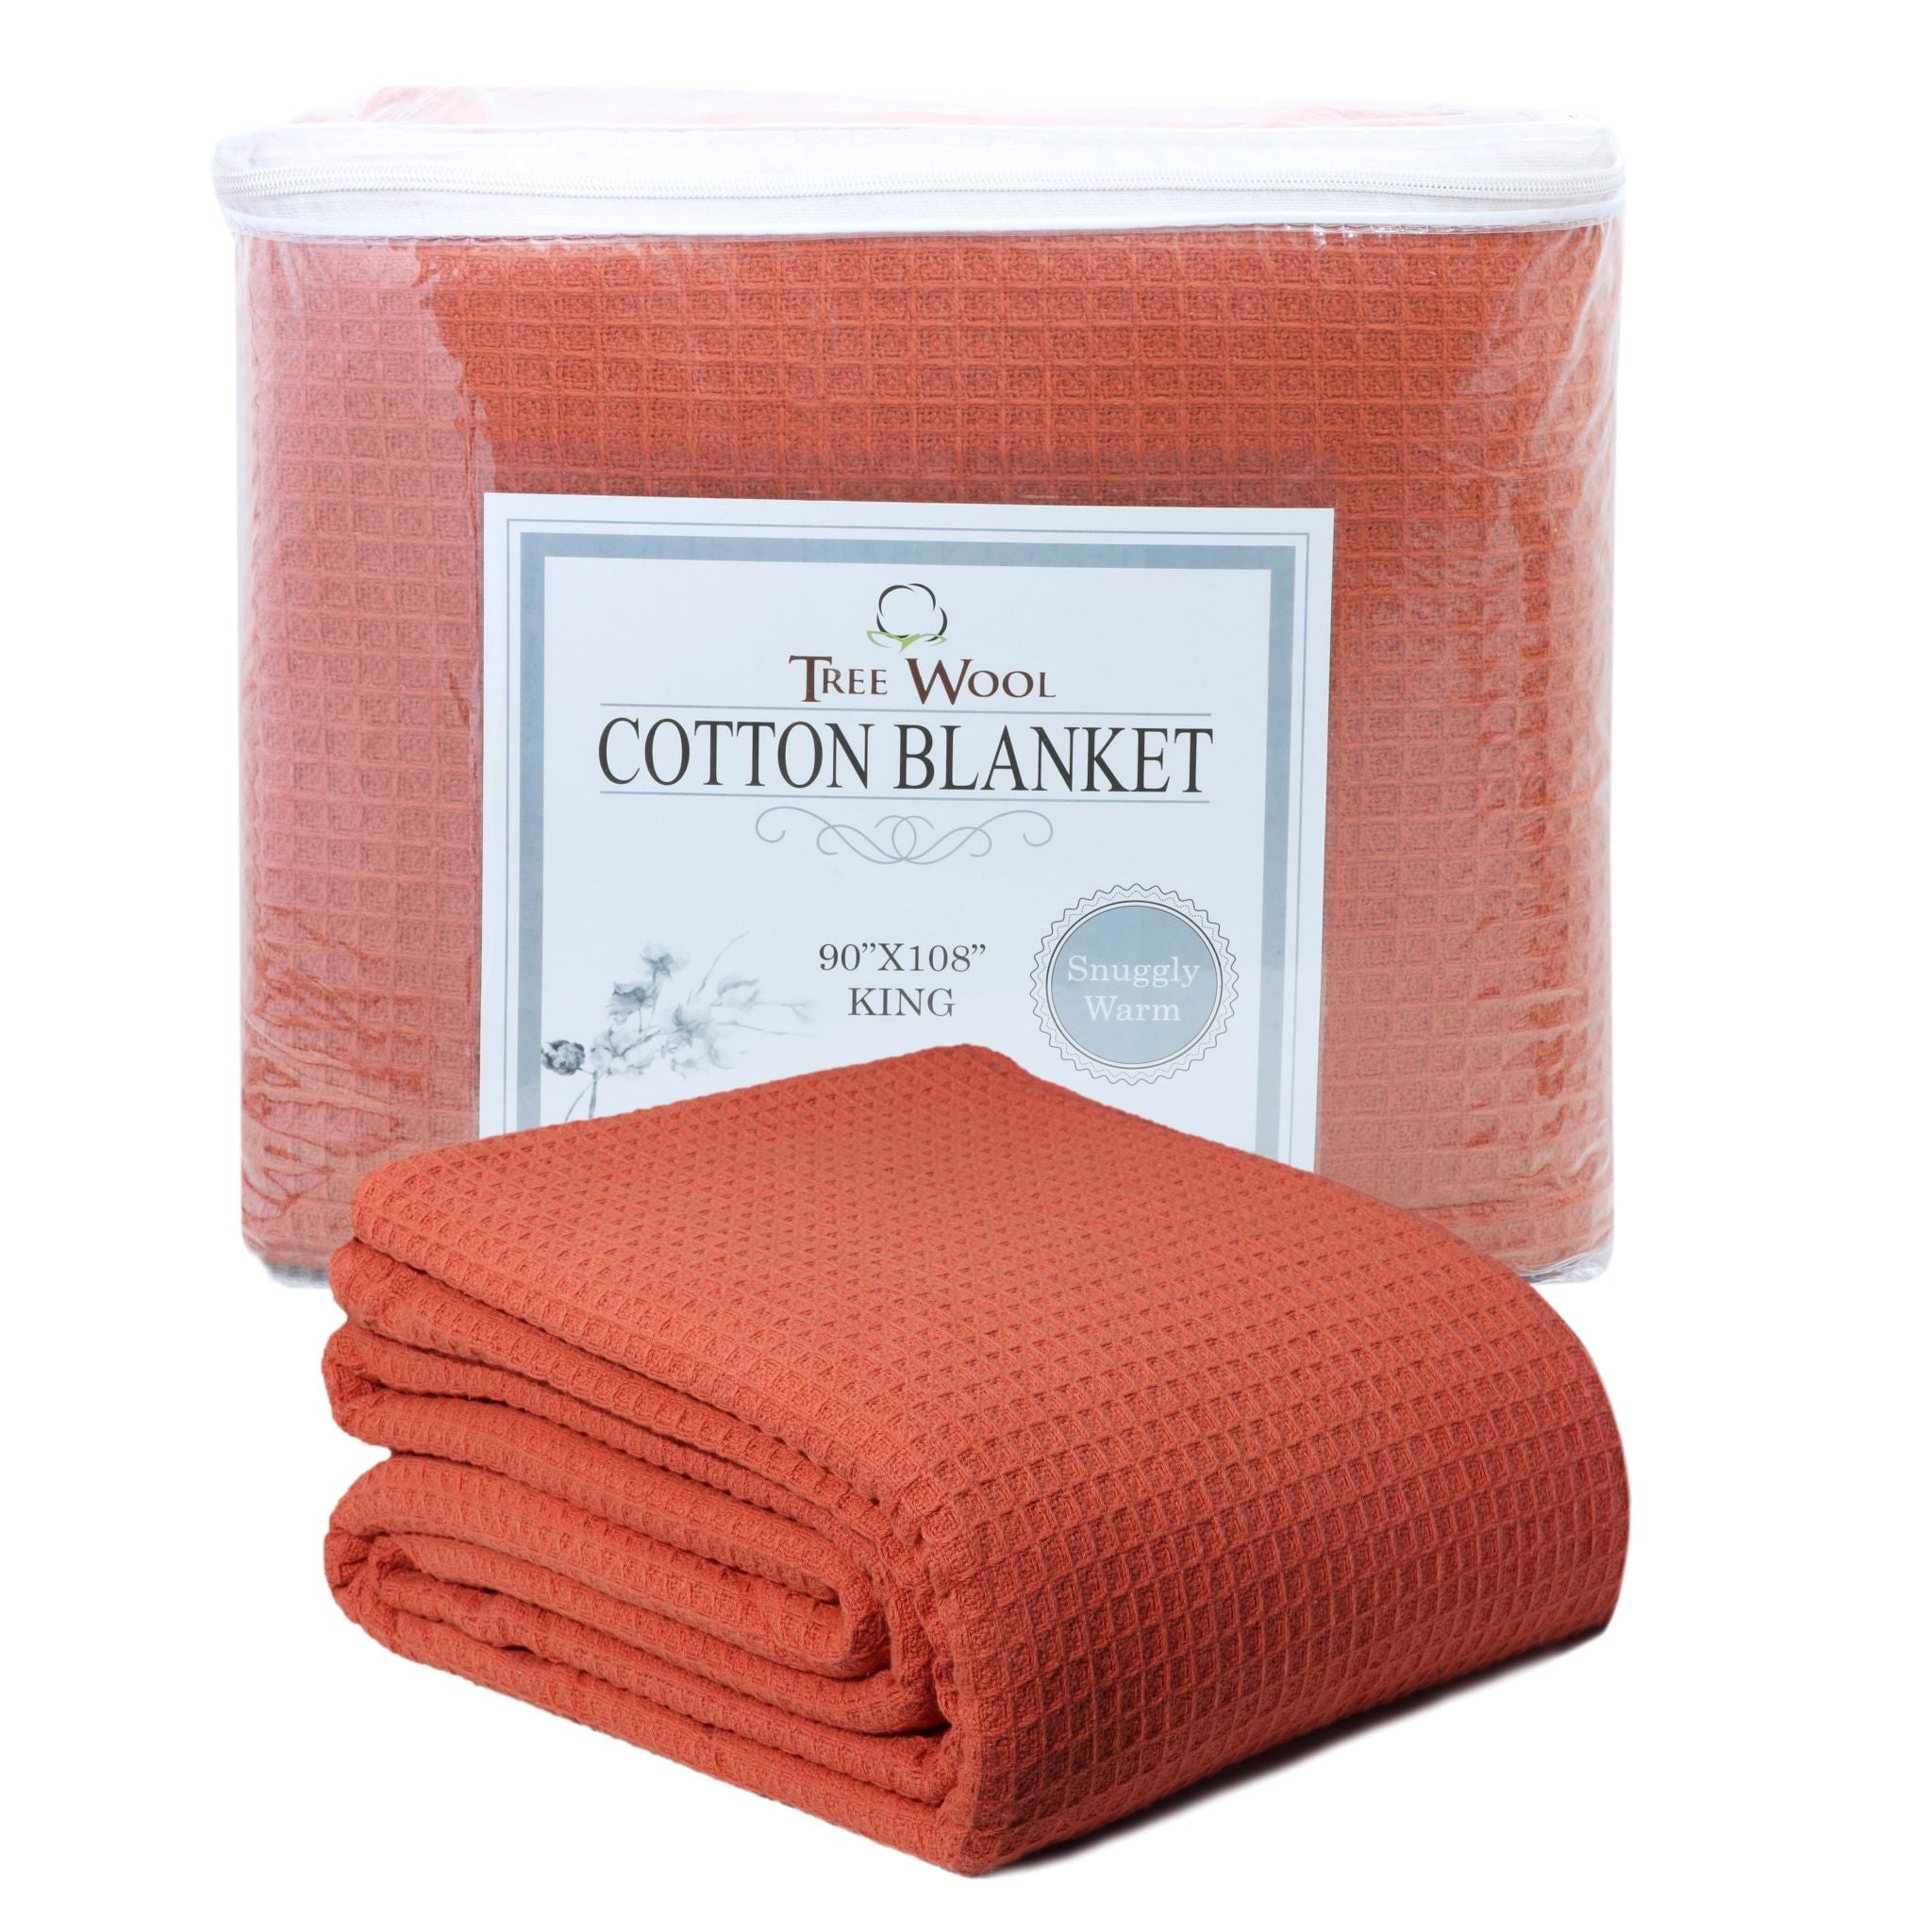 TreeWool, Waffle Weave 100% Cotton Breathable Blanket 420 GSM